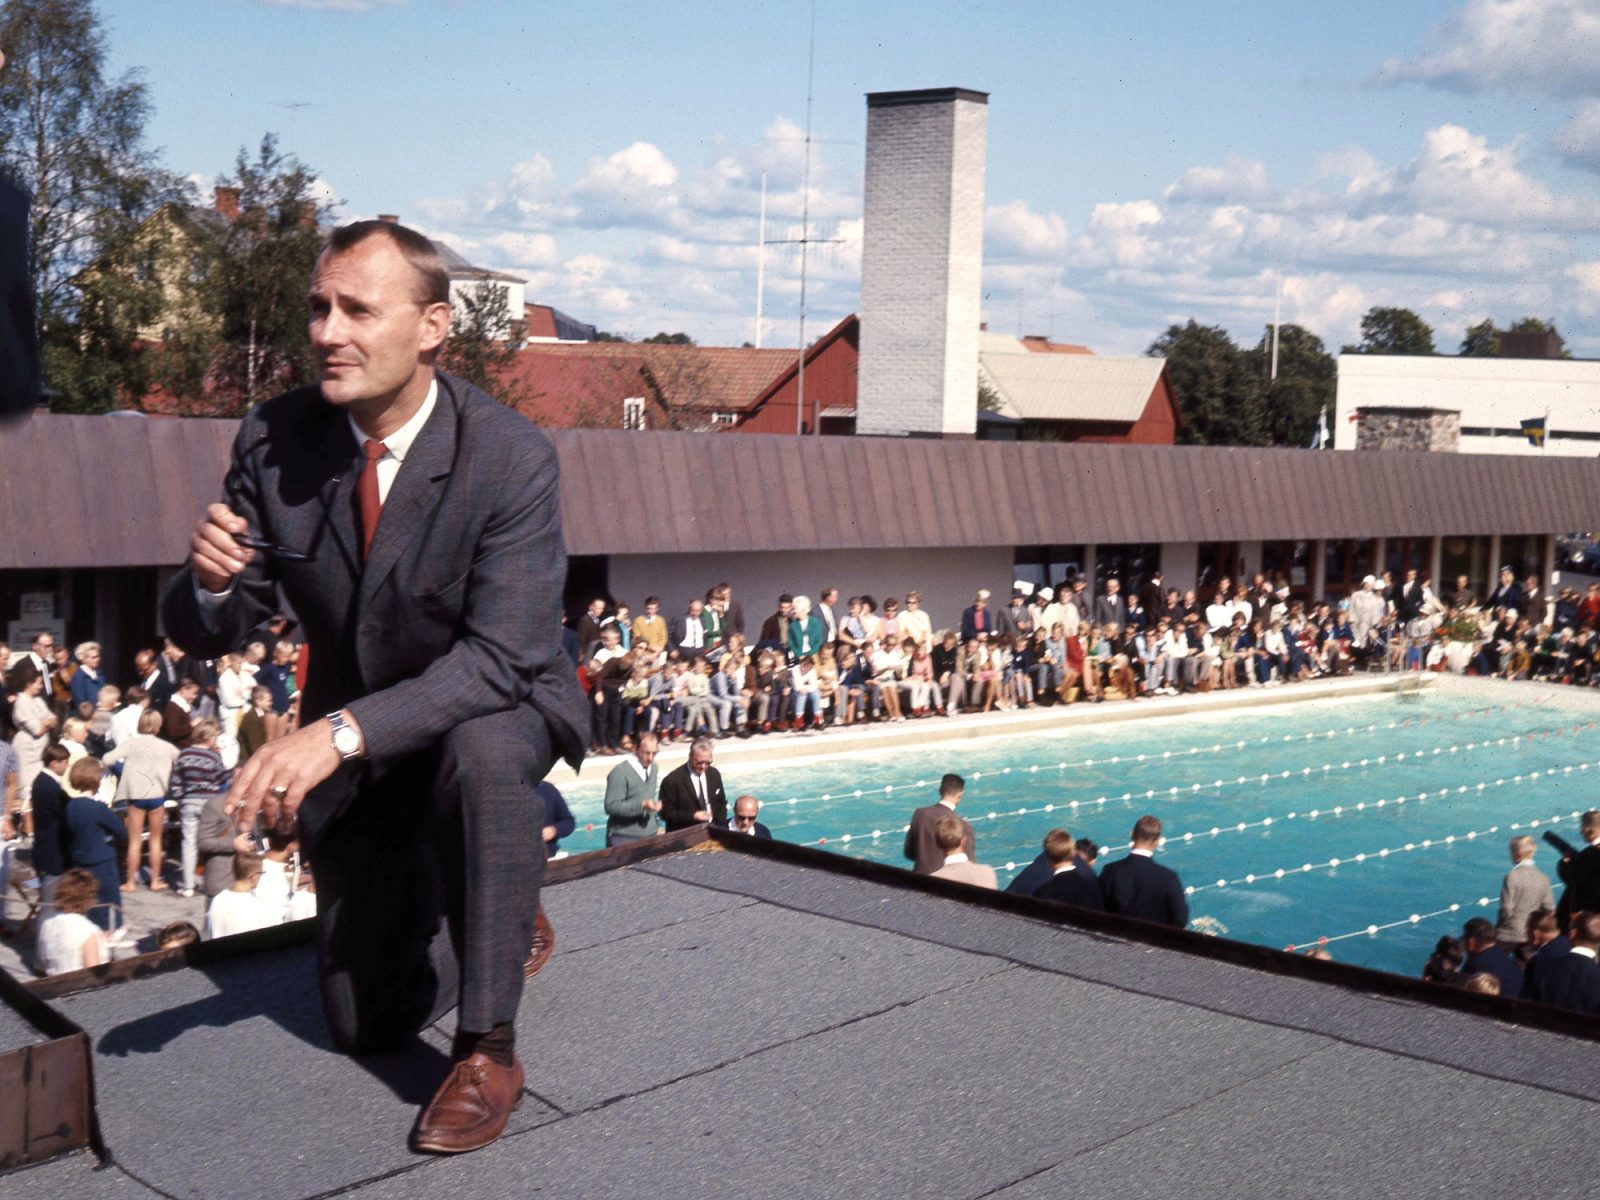 Ingvar Kamprad on a roof, dressed in suit with microphone, a swimming pool and mingling people in the background.